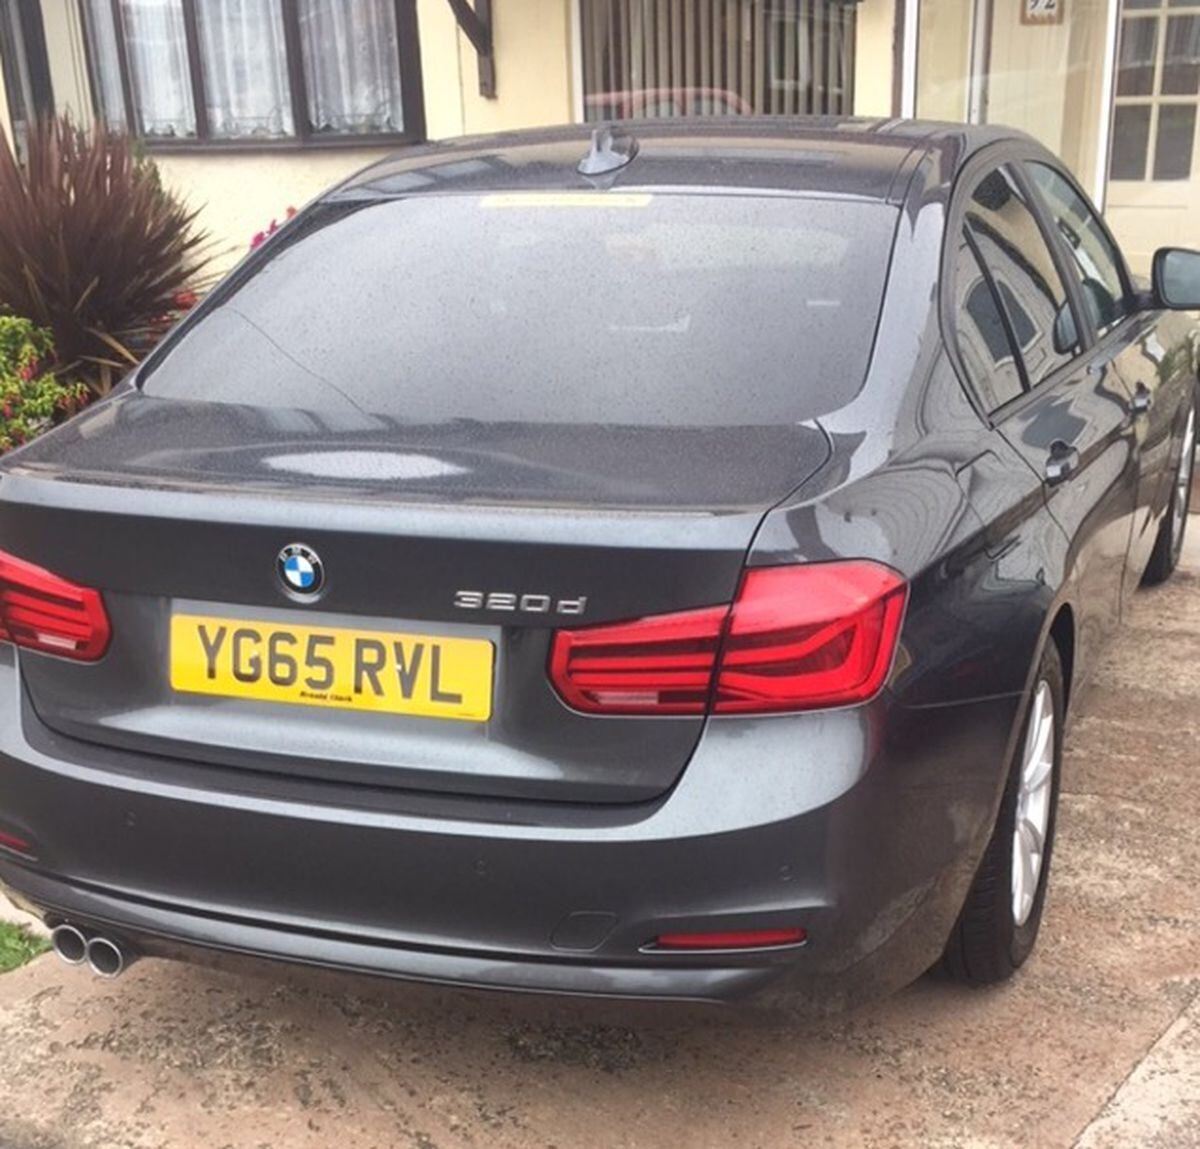 The BMW that was stolen from the drive